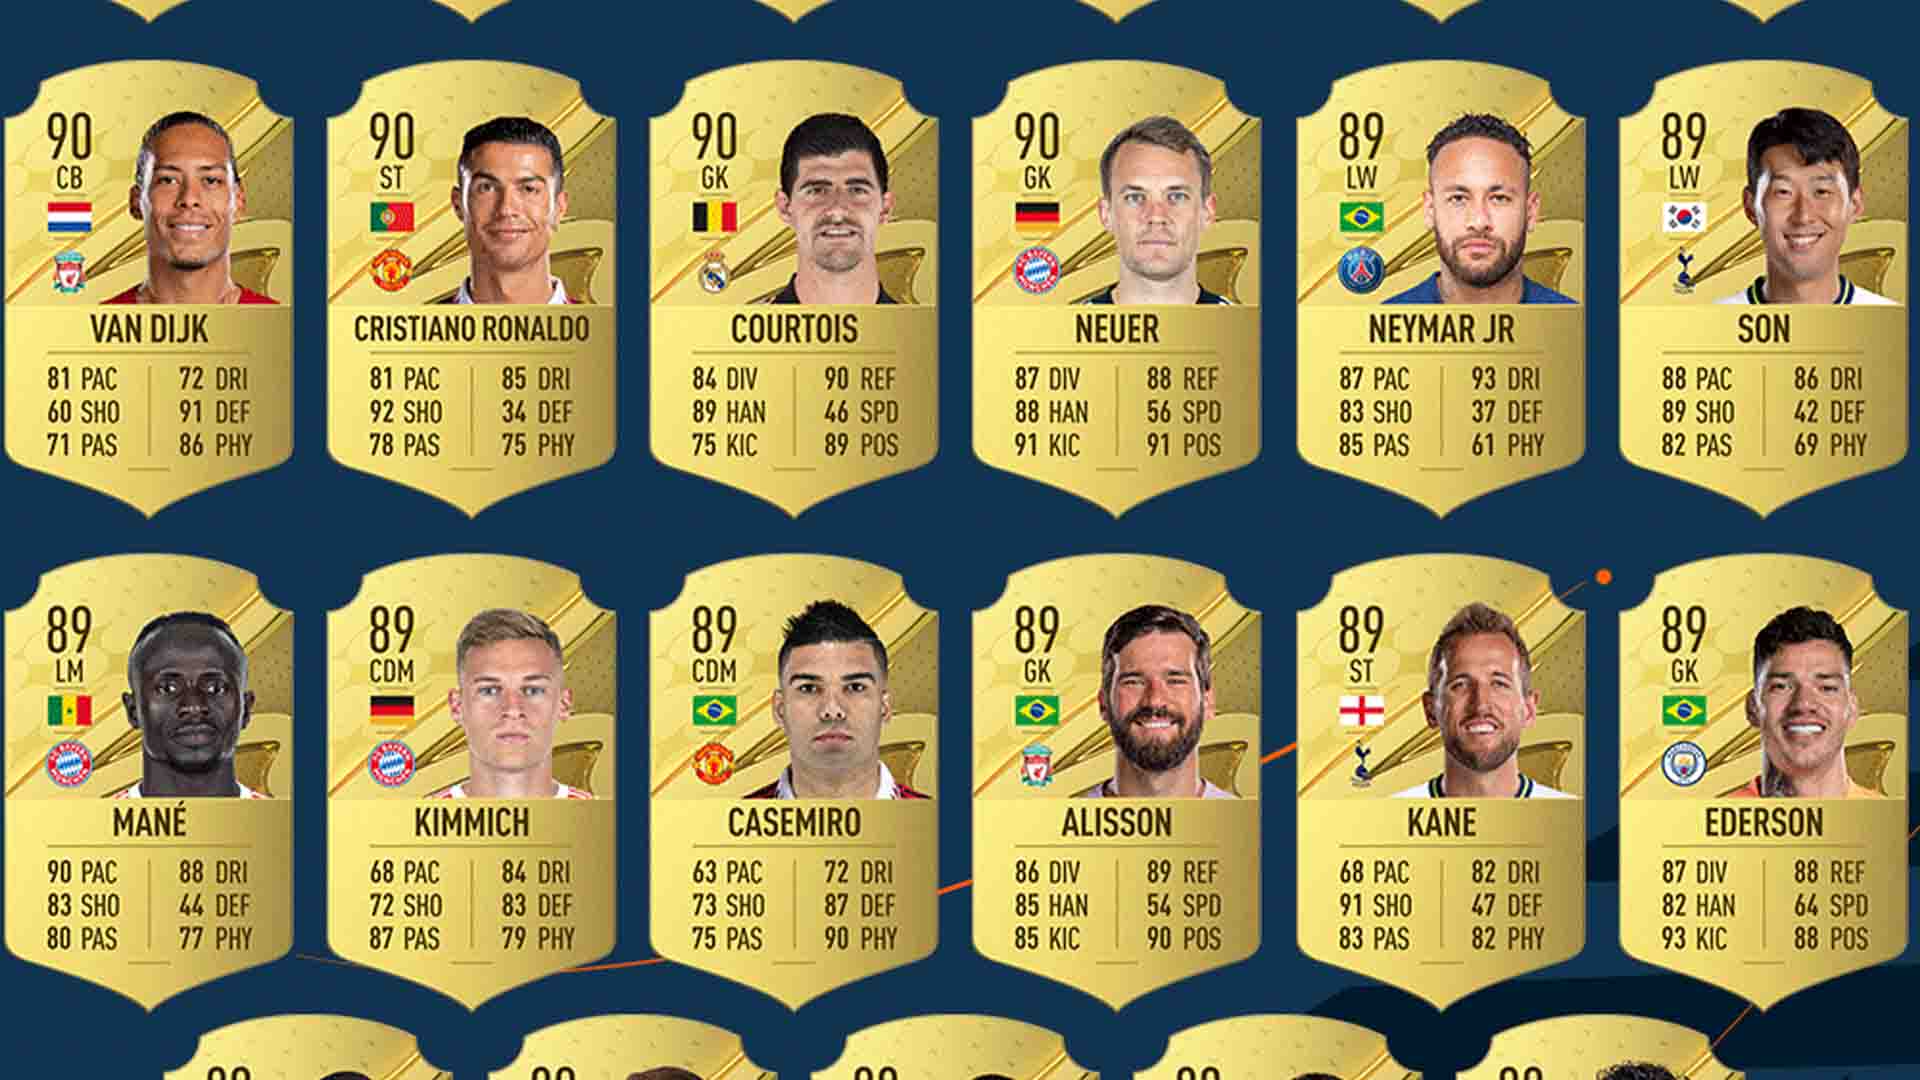 FIFA 23 top rated players revealed